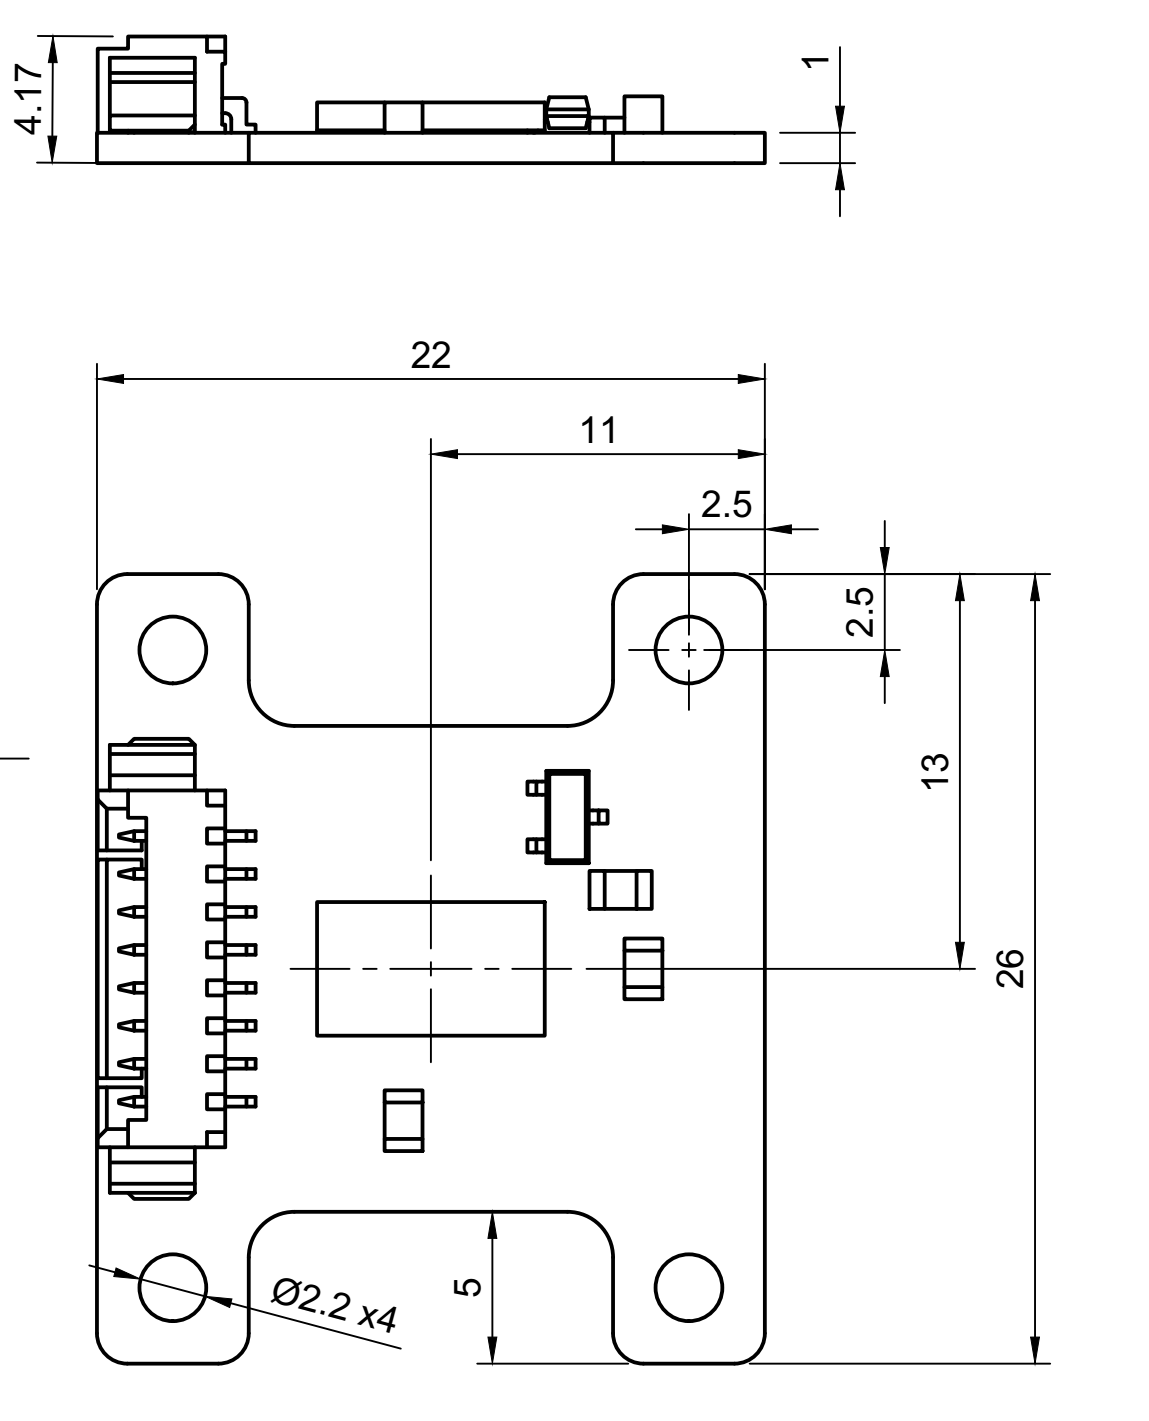 LIS3LV02DL Breakout board PCB drawing